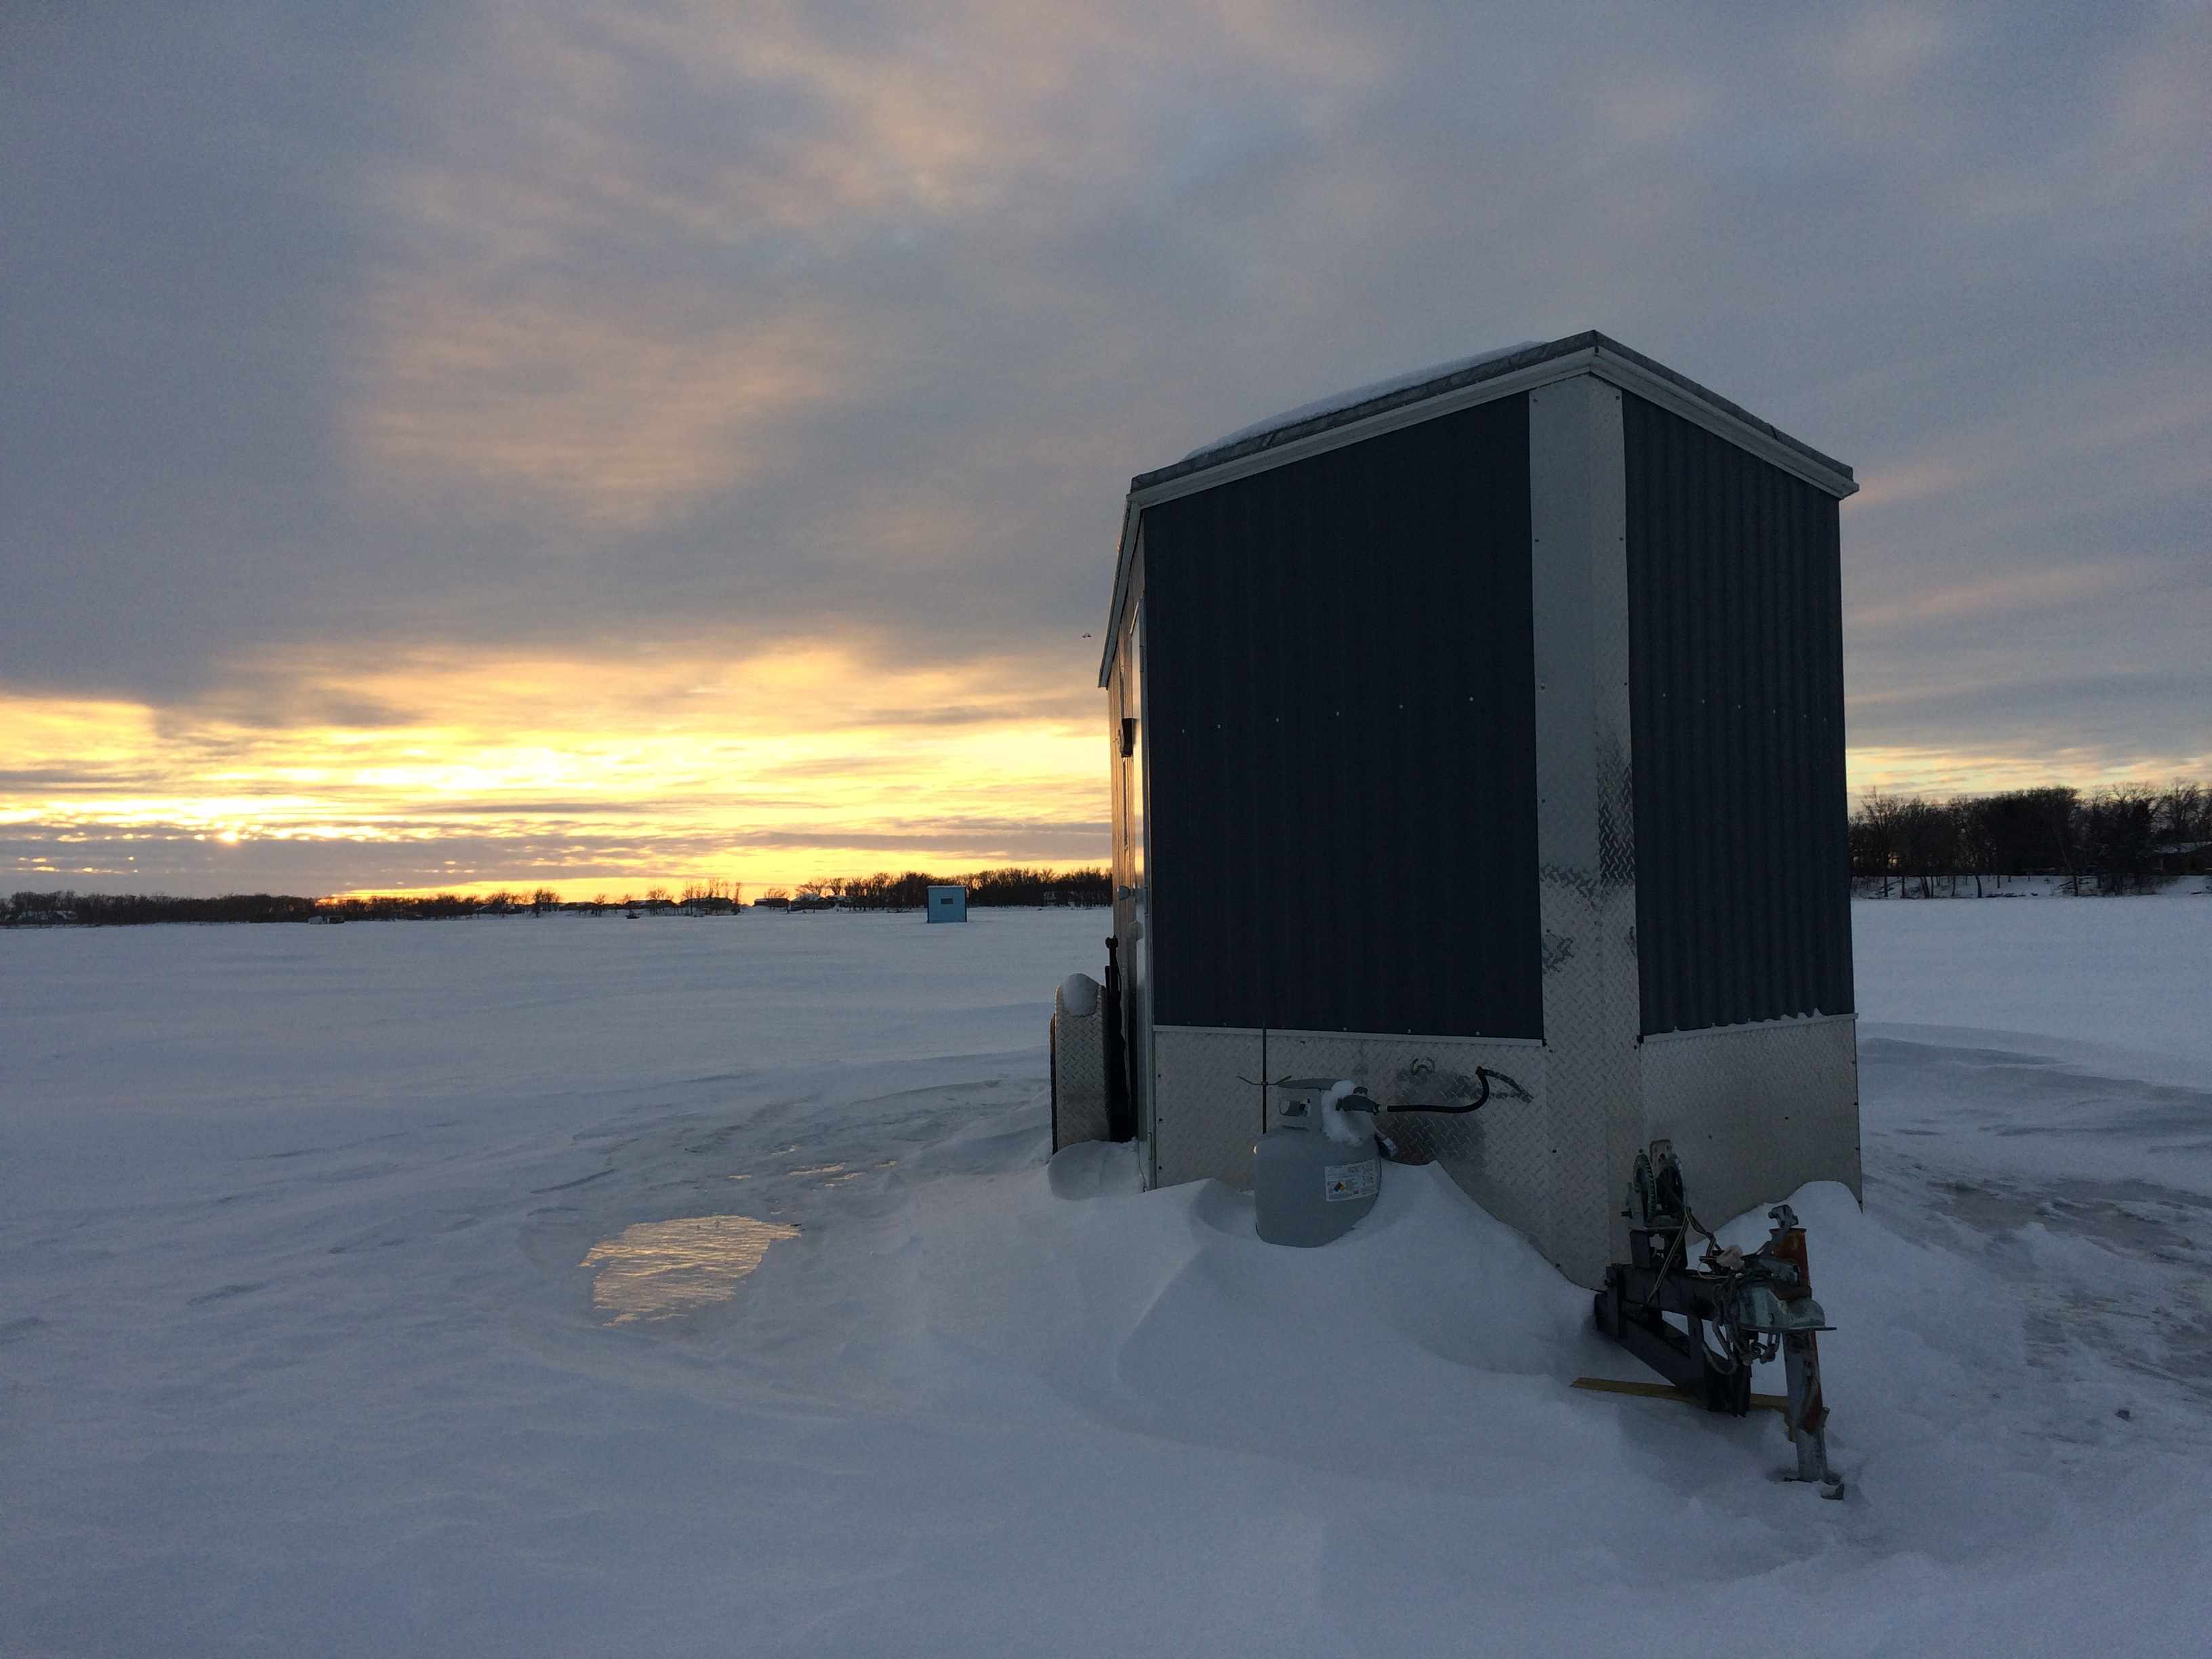 sunset on a frozen lake with ice fishing house in foreground